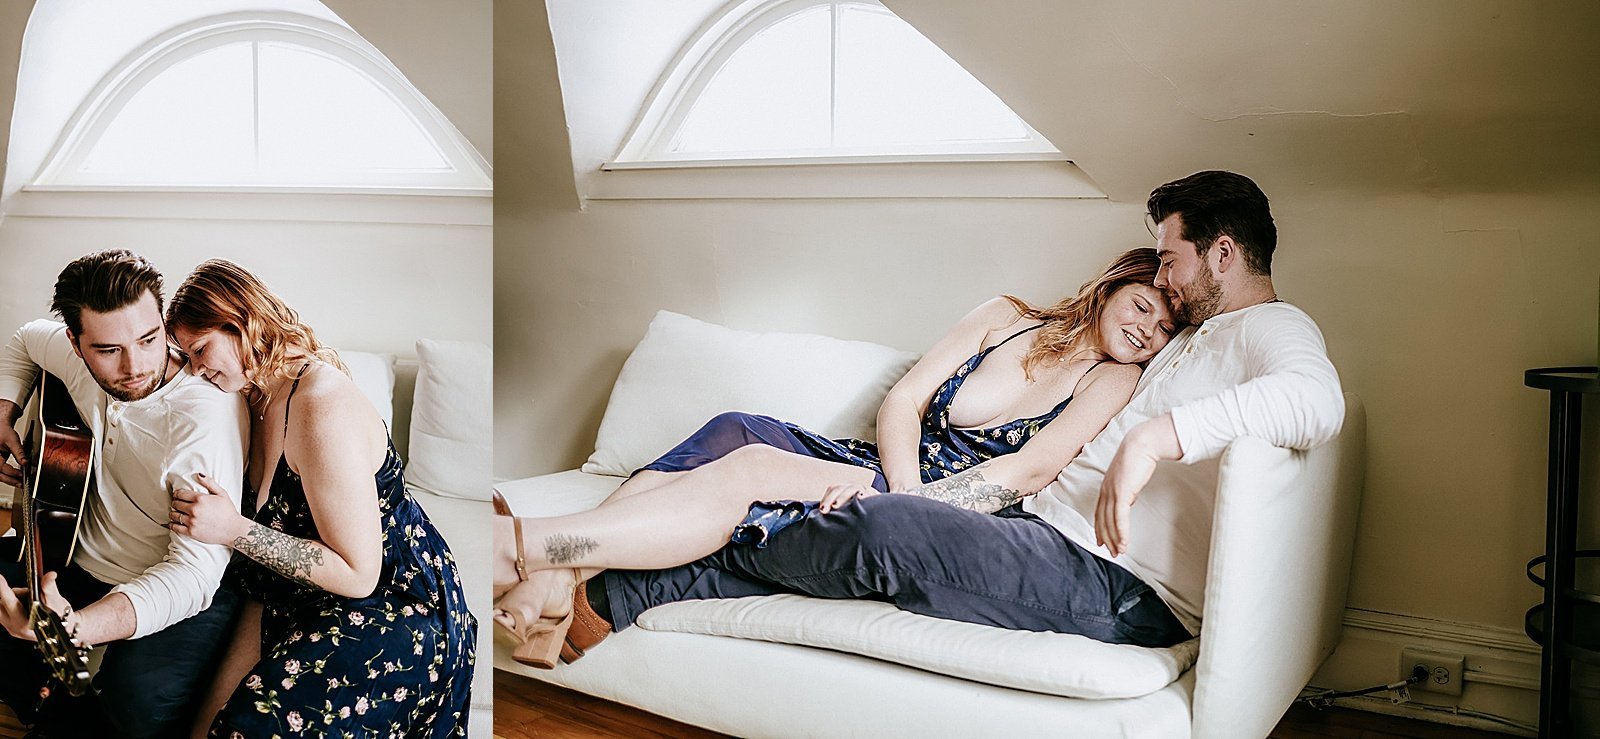  Couple snuggling on the couch for intimate photo shoot 